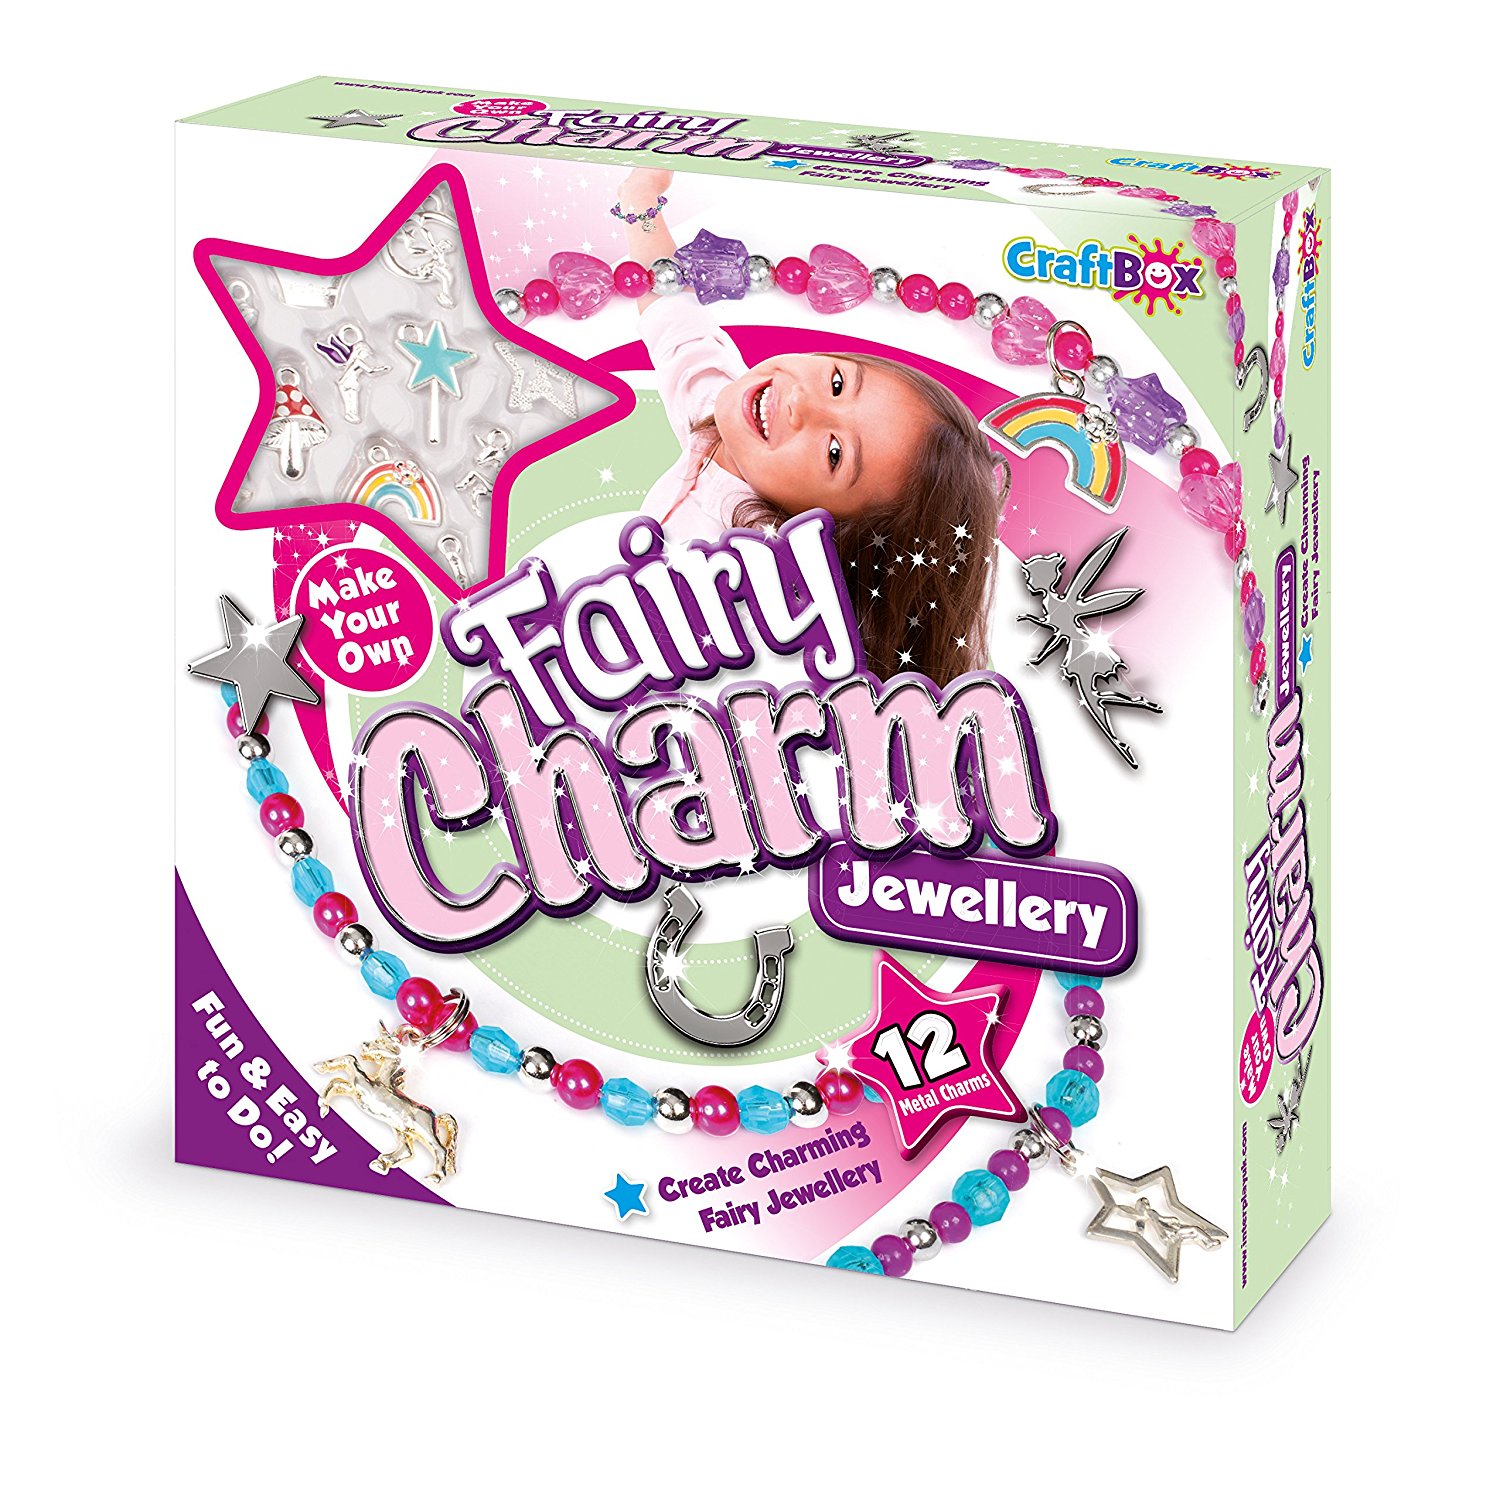 Getting Crafty With The Craft Box Fairy Charm Jewellery Set